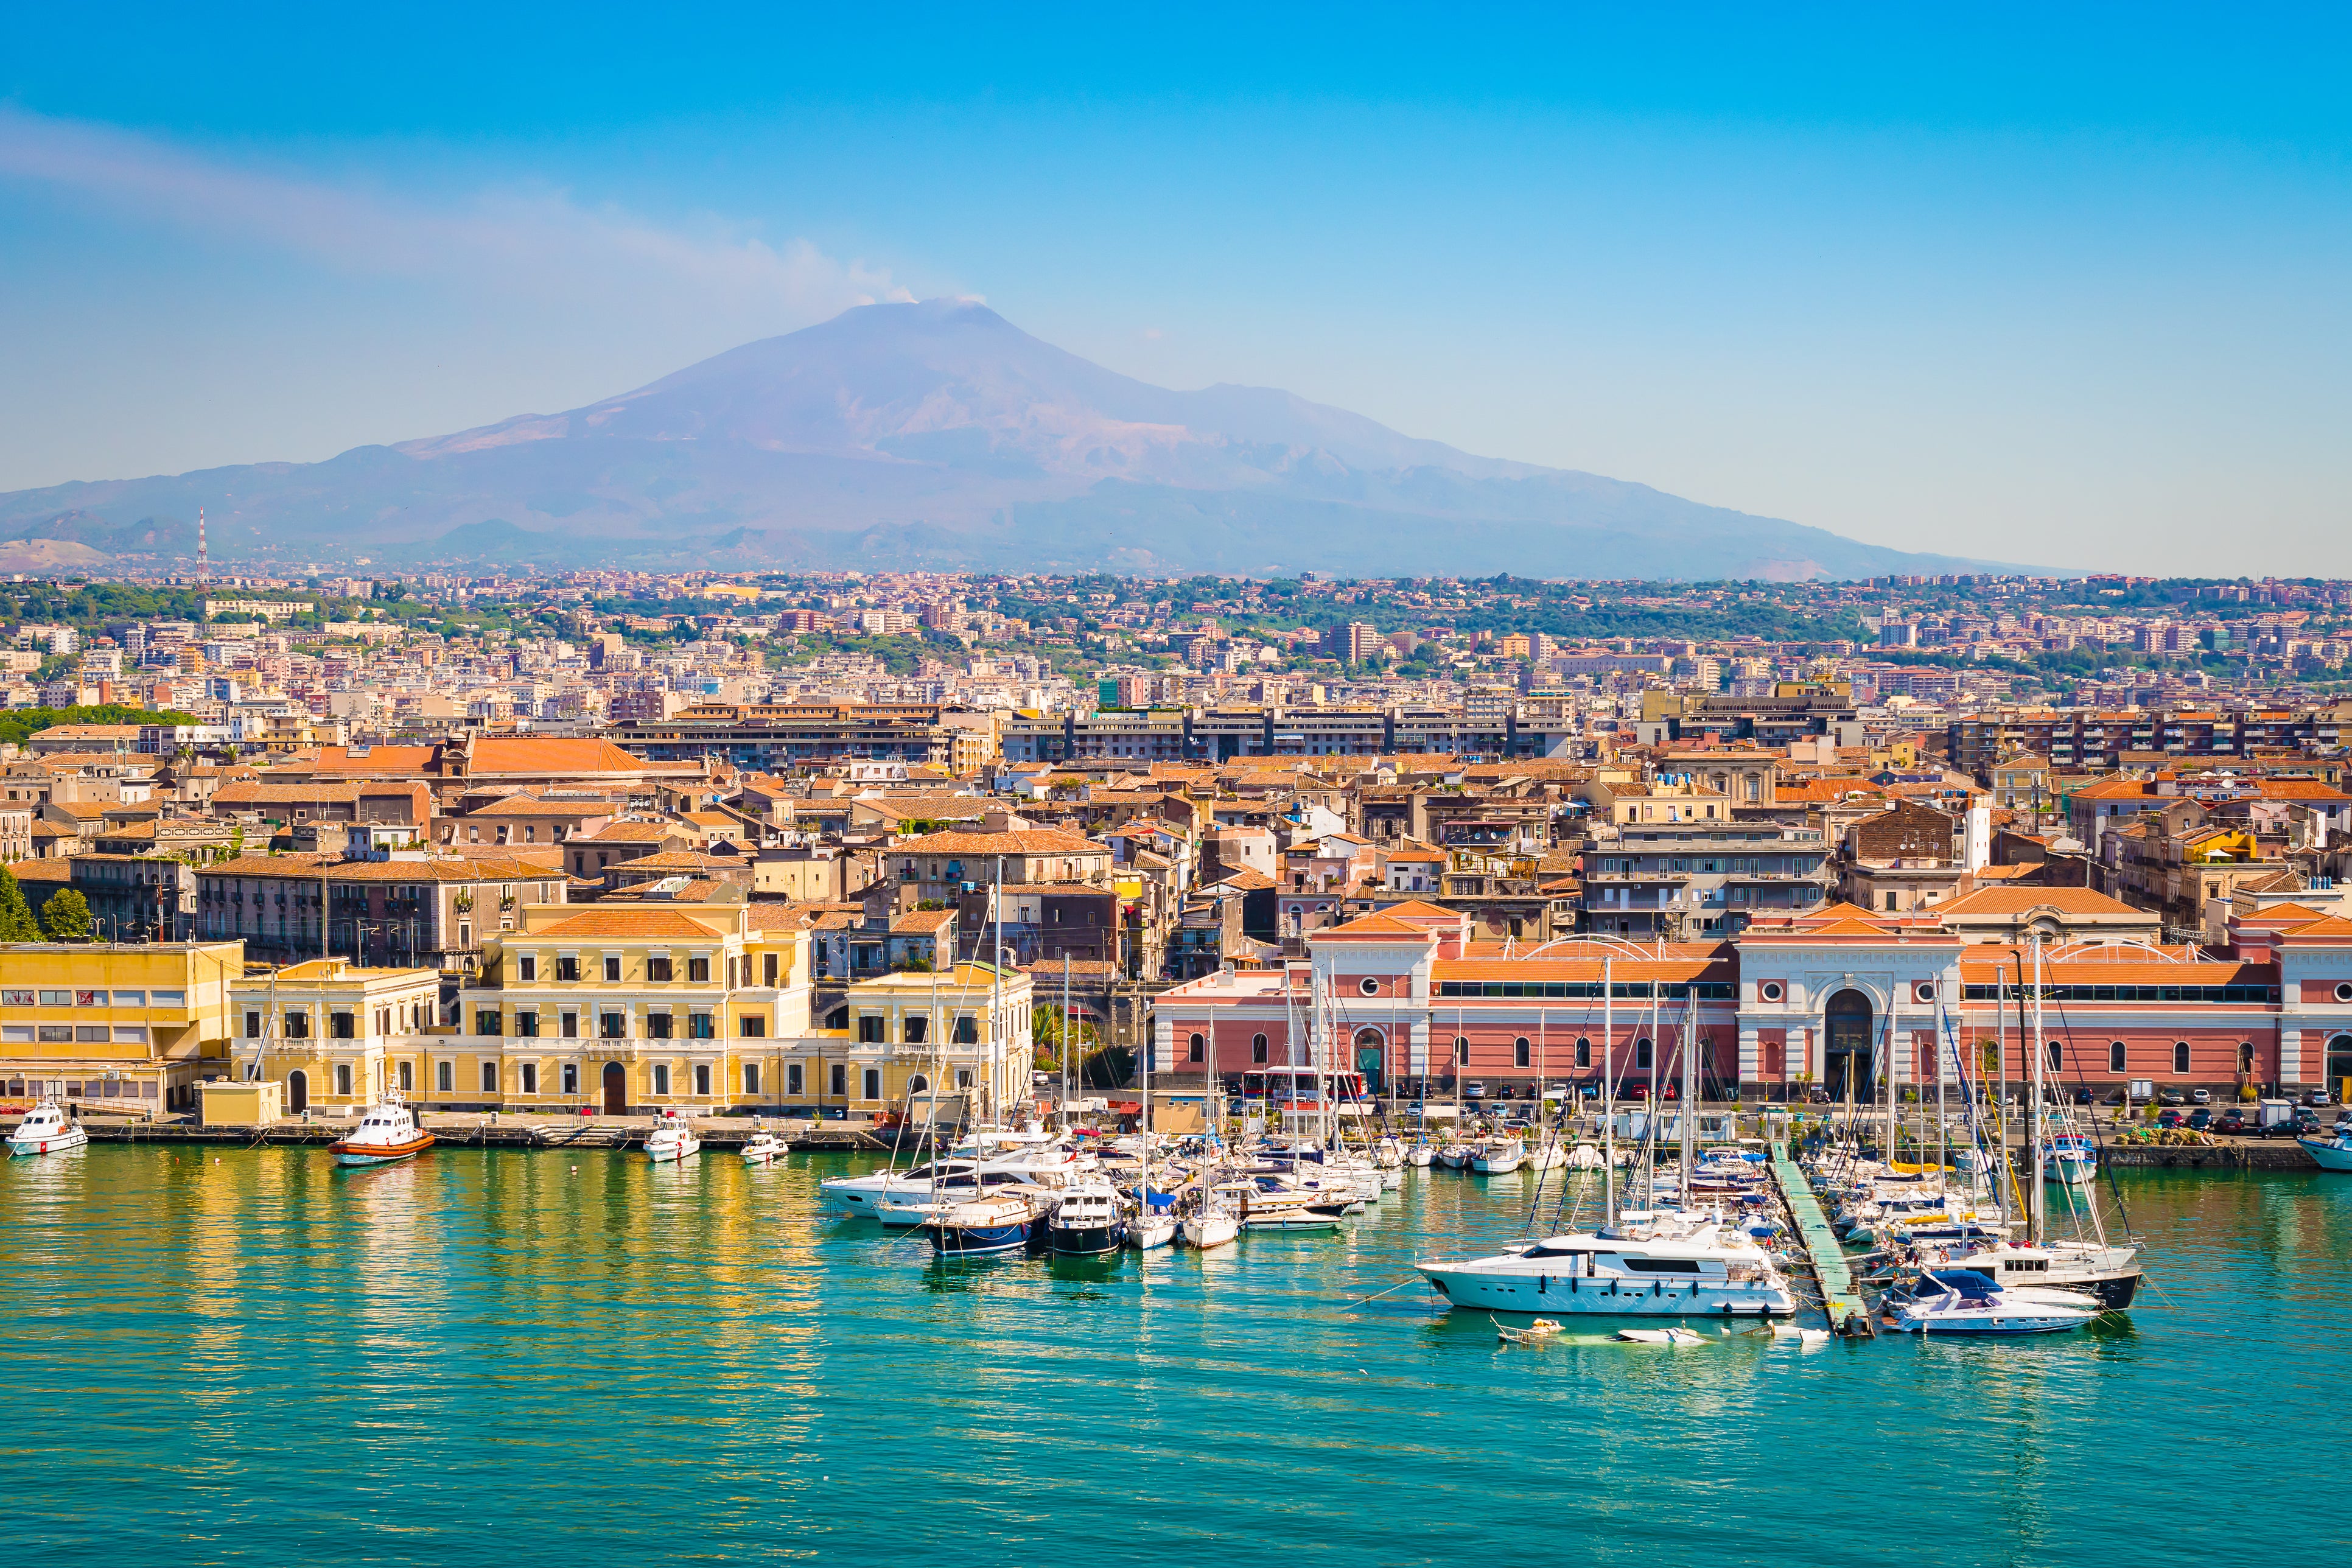 The city of Catania is located close to Mount Etna